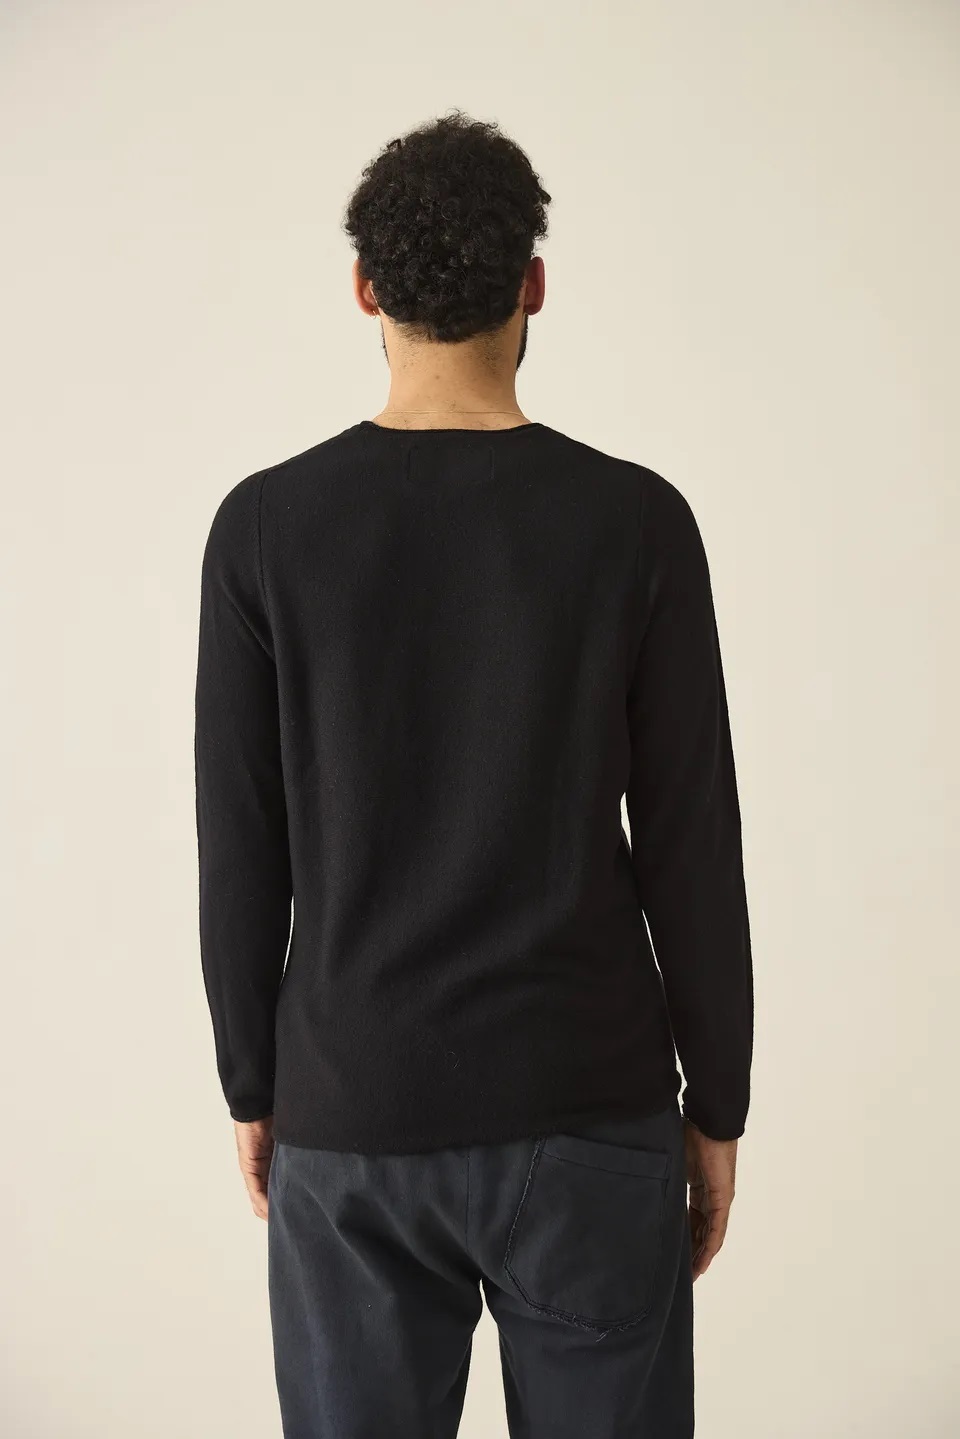 HANNIBAL. Knit Pullover Nevio in Charcoal 48